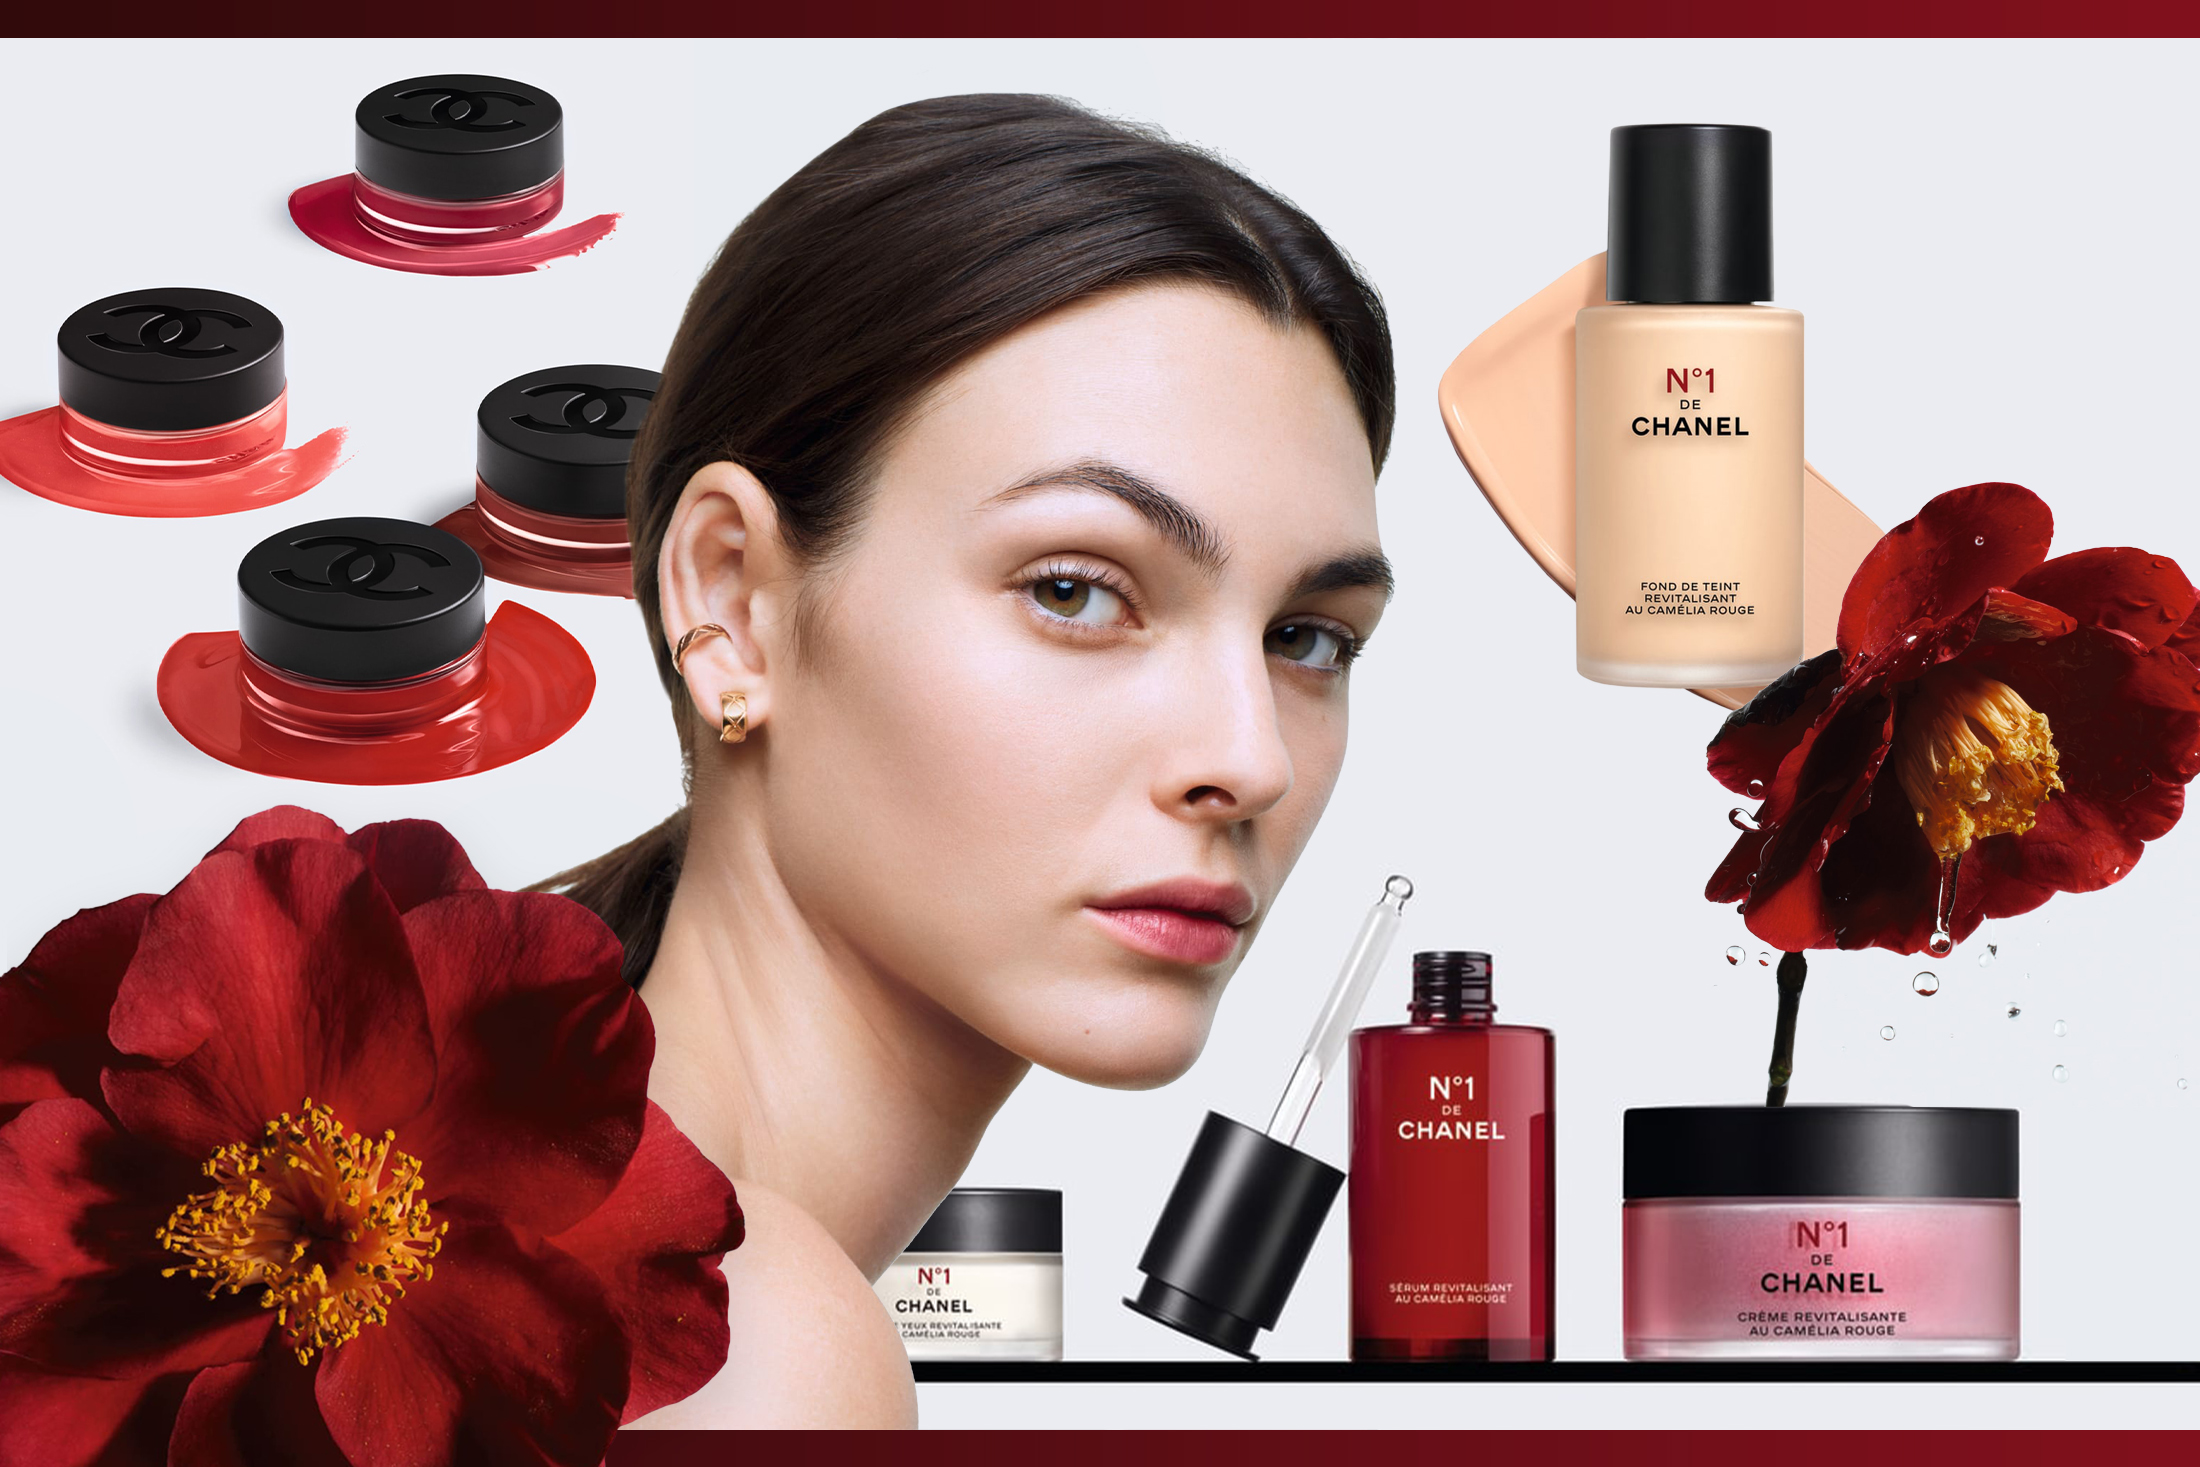 Chanel Beauty Harnesses the Power of the Camellia | Curatedition